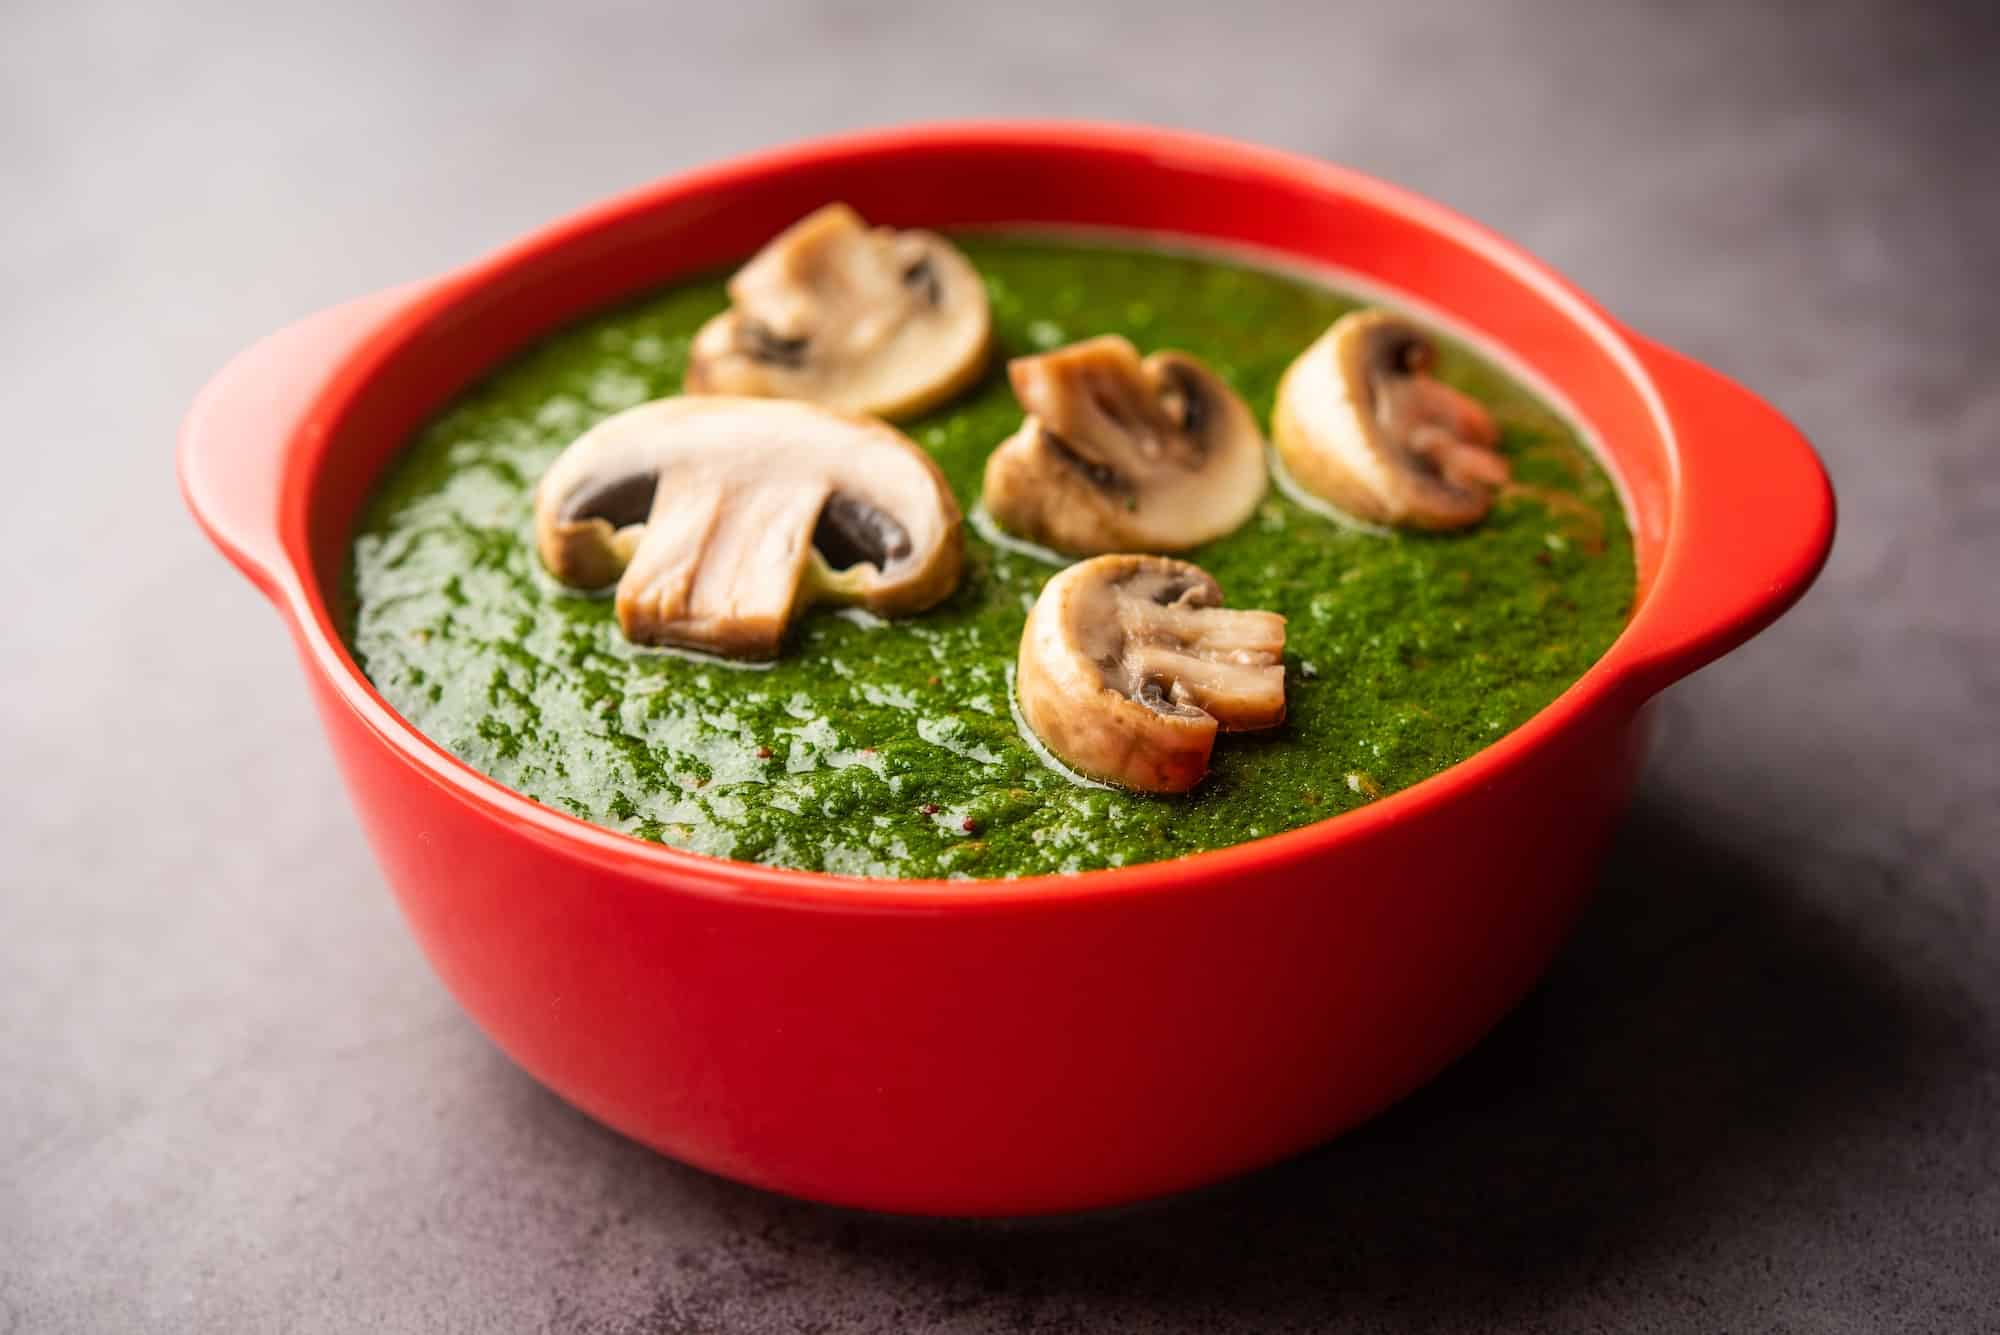 Palak Mushroom is an Indian curry dish